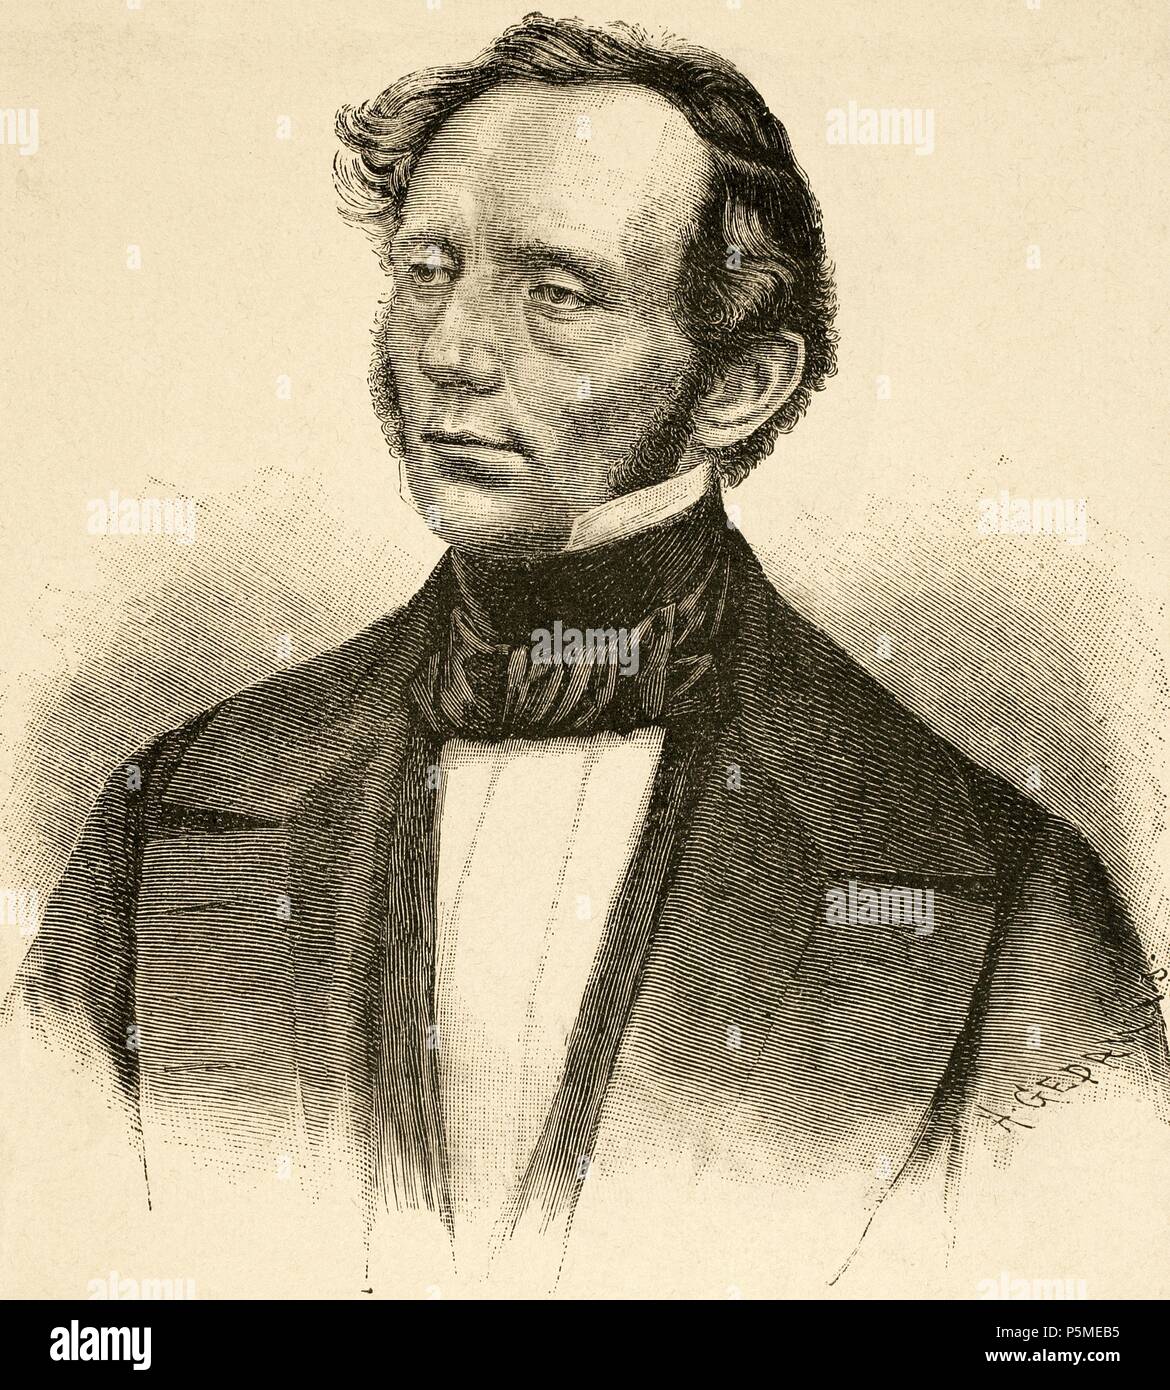 Hermann von Beckerath (1801-1870). Prussian politician and banker. Engraving in World History, 1885. Stock Photo